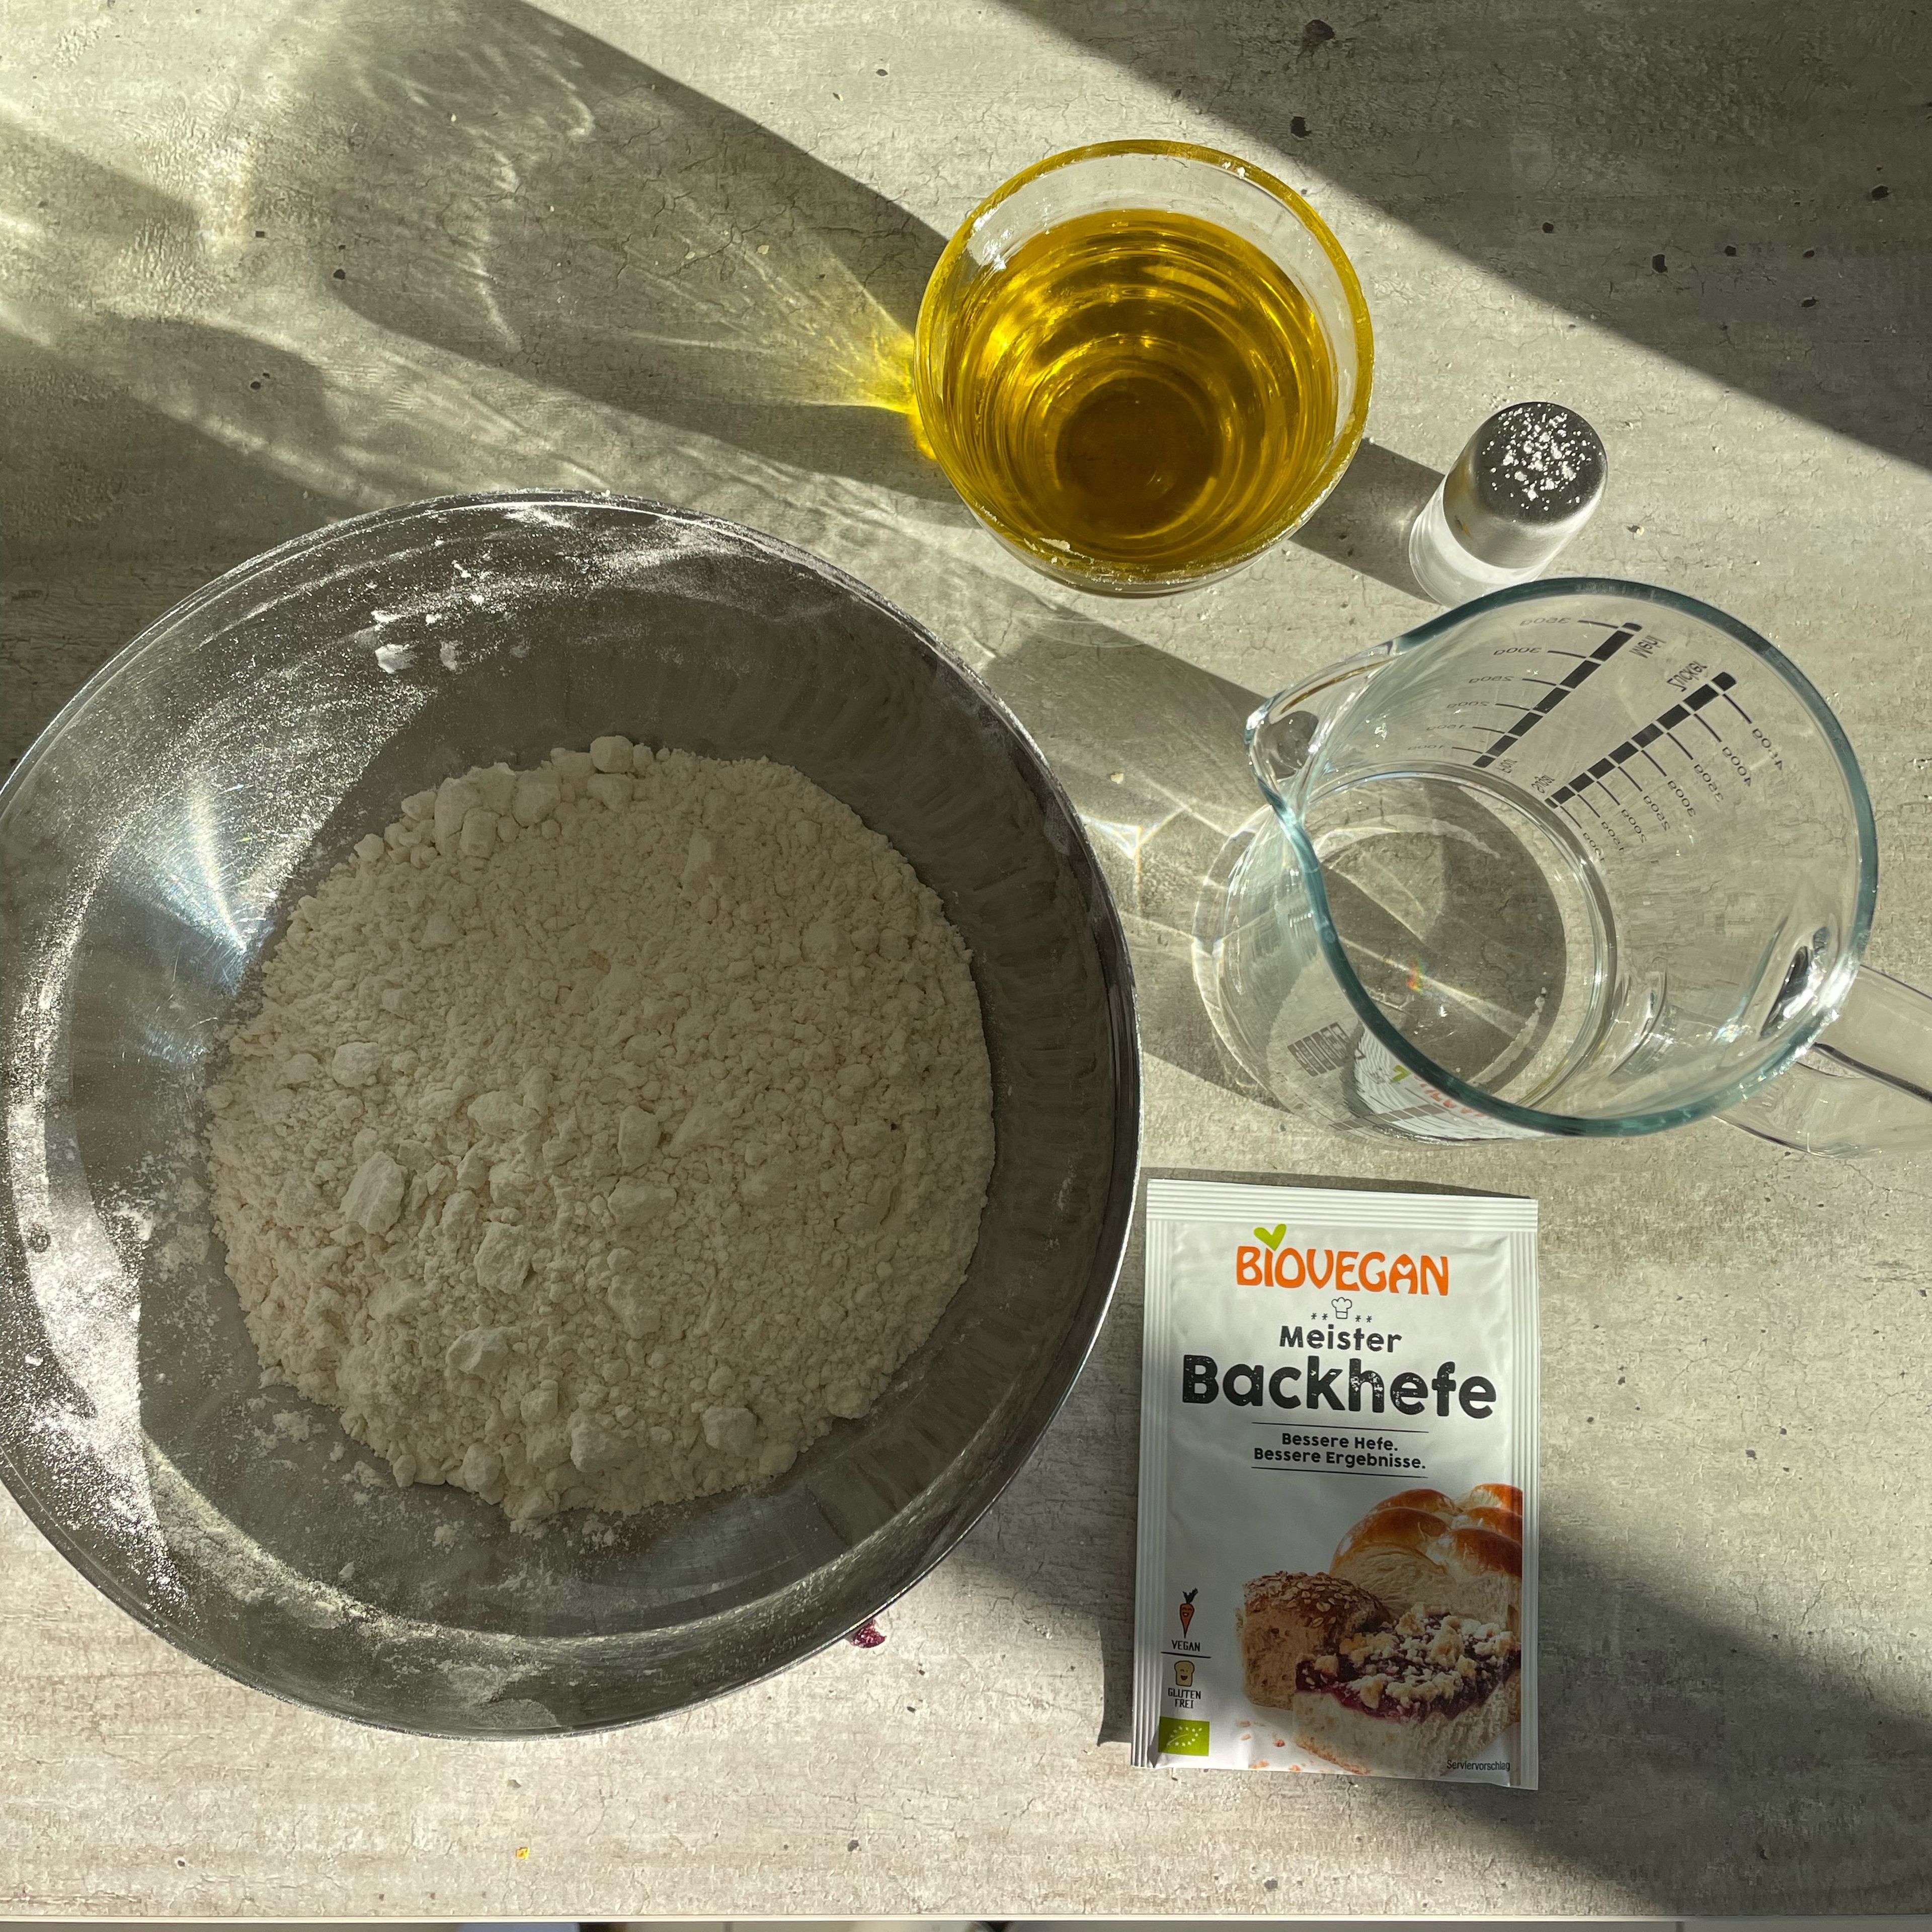 In the meantime we can prepare the dough. Add the flour, yeast and salt to a bowl. Mix the water and oil in a different bowl - then start adding the flour mix, little by little while mixing all ingredients.